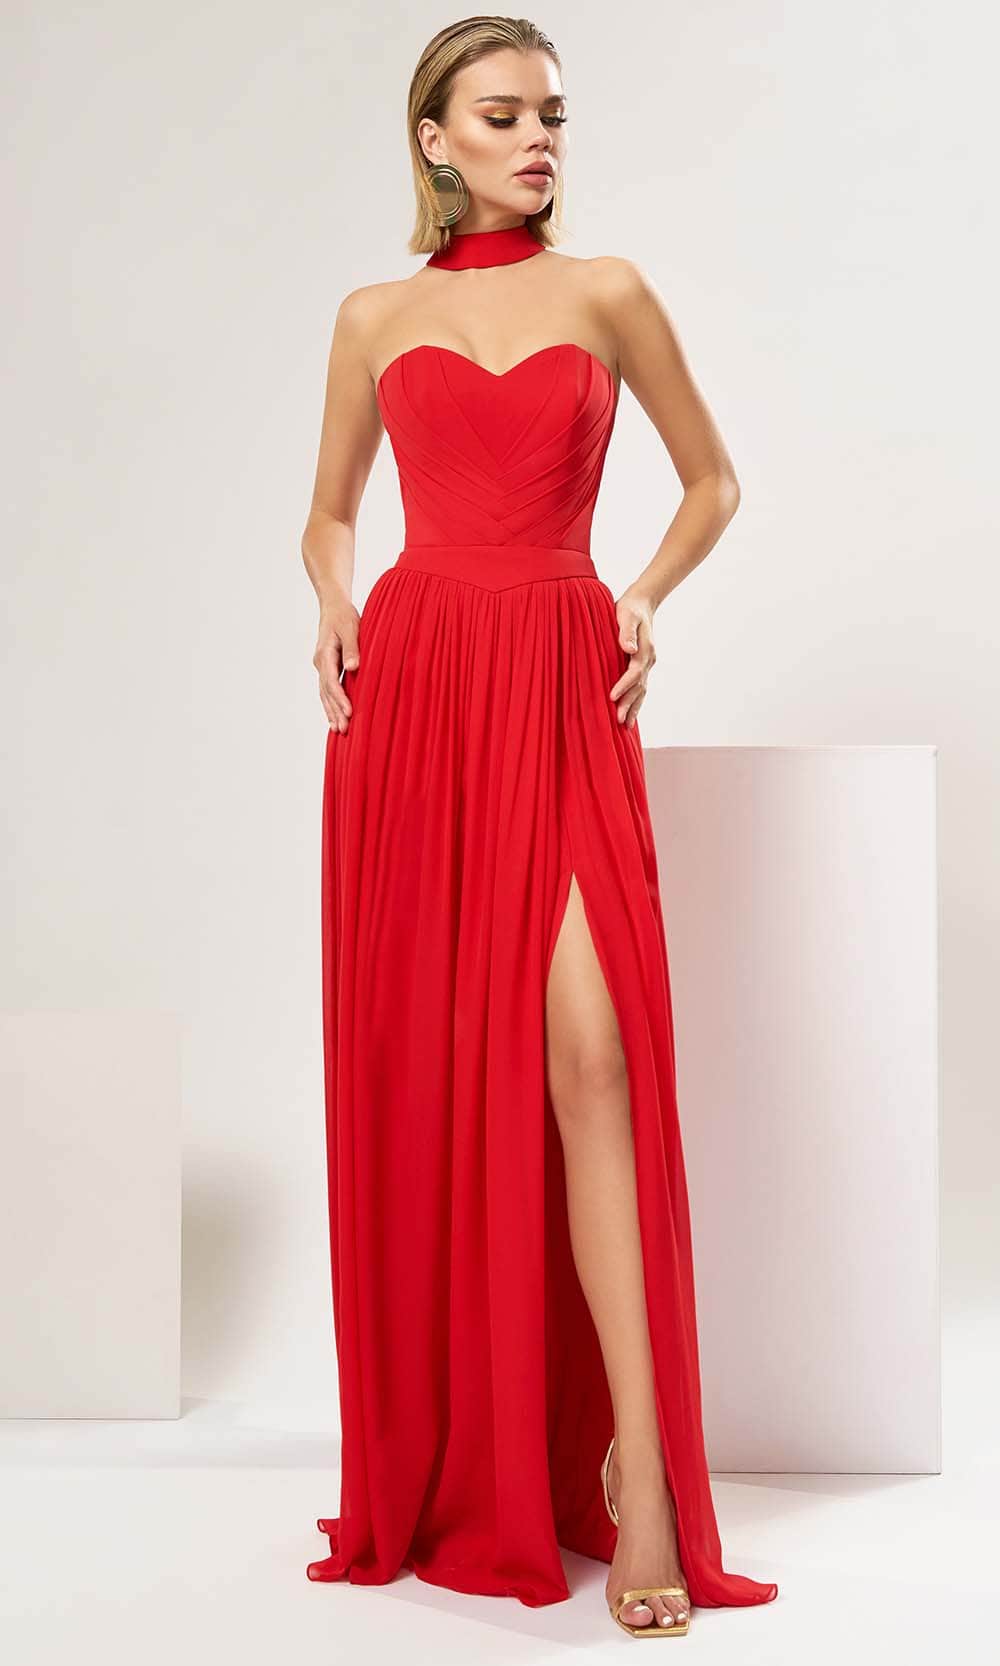 Cristallini Amore CA26 - Sweetheart Cutout Back Evening Gown
